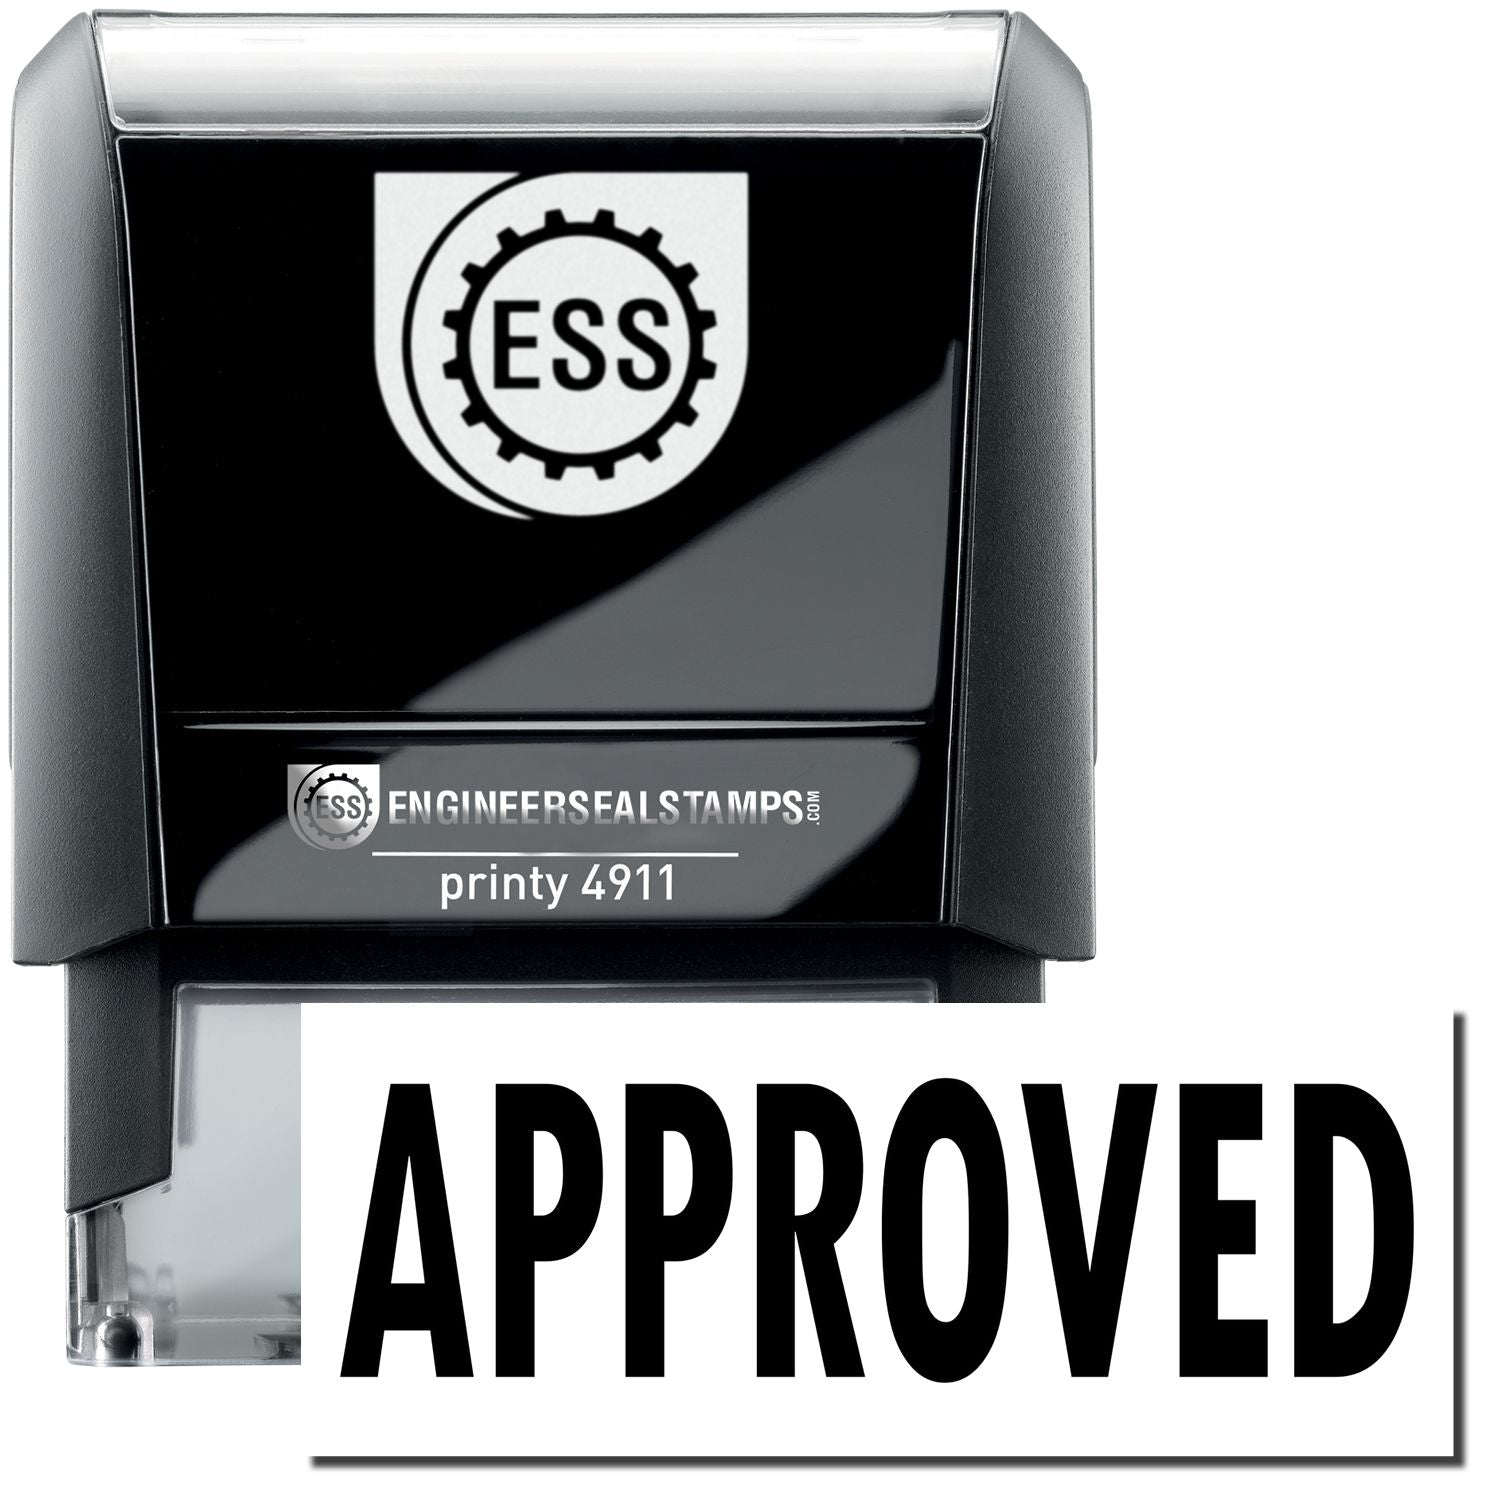 A self-inking stamp with a stamped image showing how the text "APPROVED" is displayed after stamping.